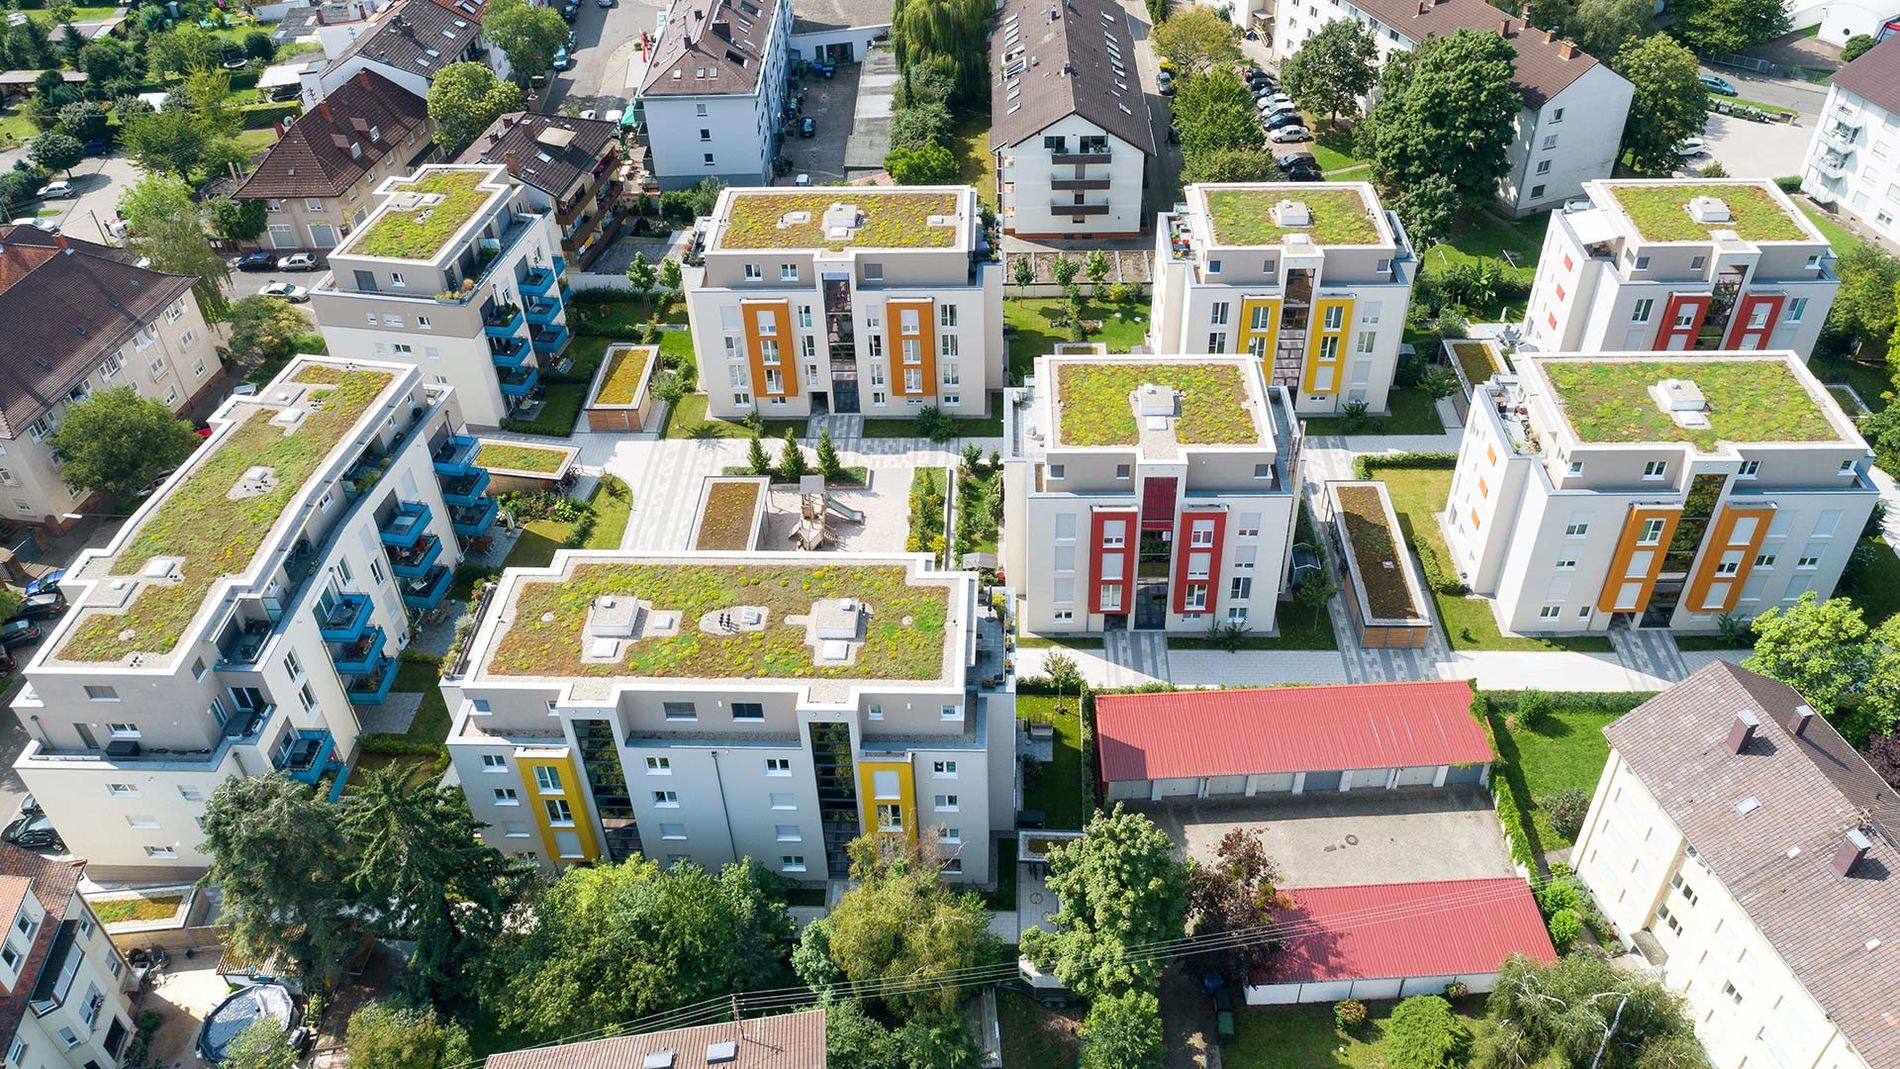 Drone image of colorful apartment buildings in Durlach